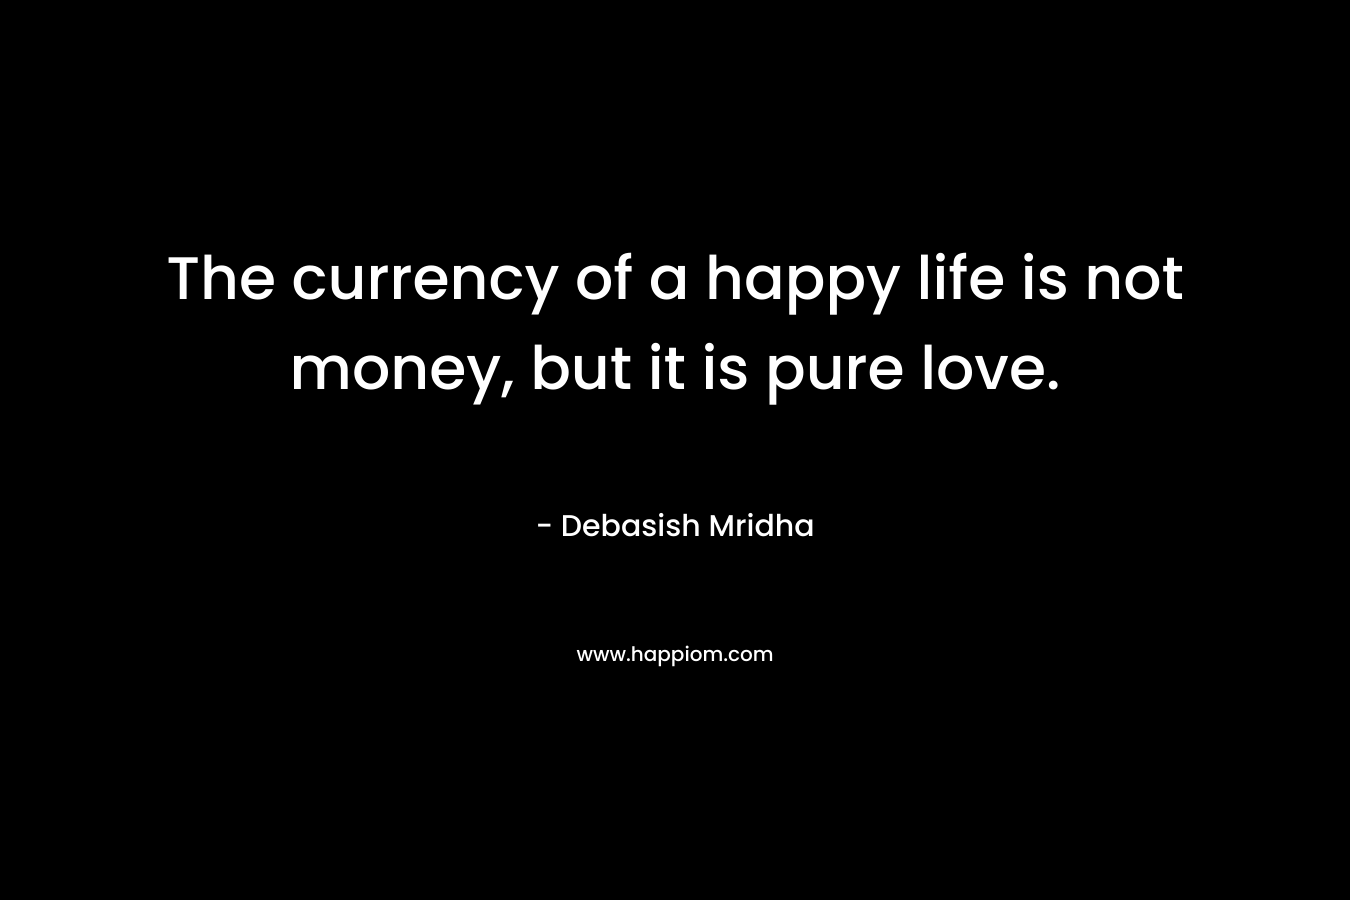 The currency of a happy life is not money, but it is pure love.